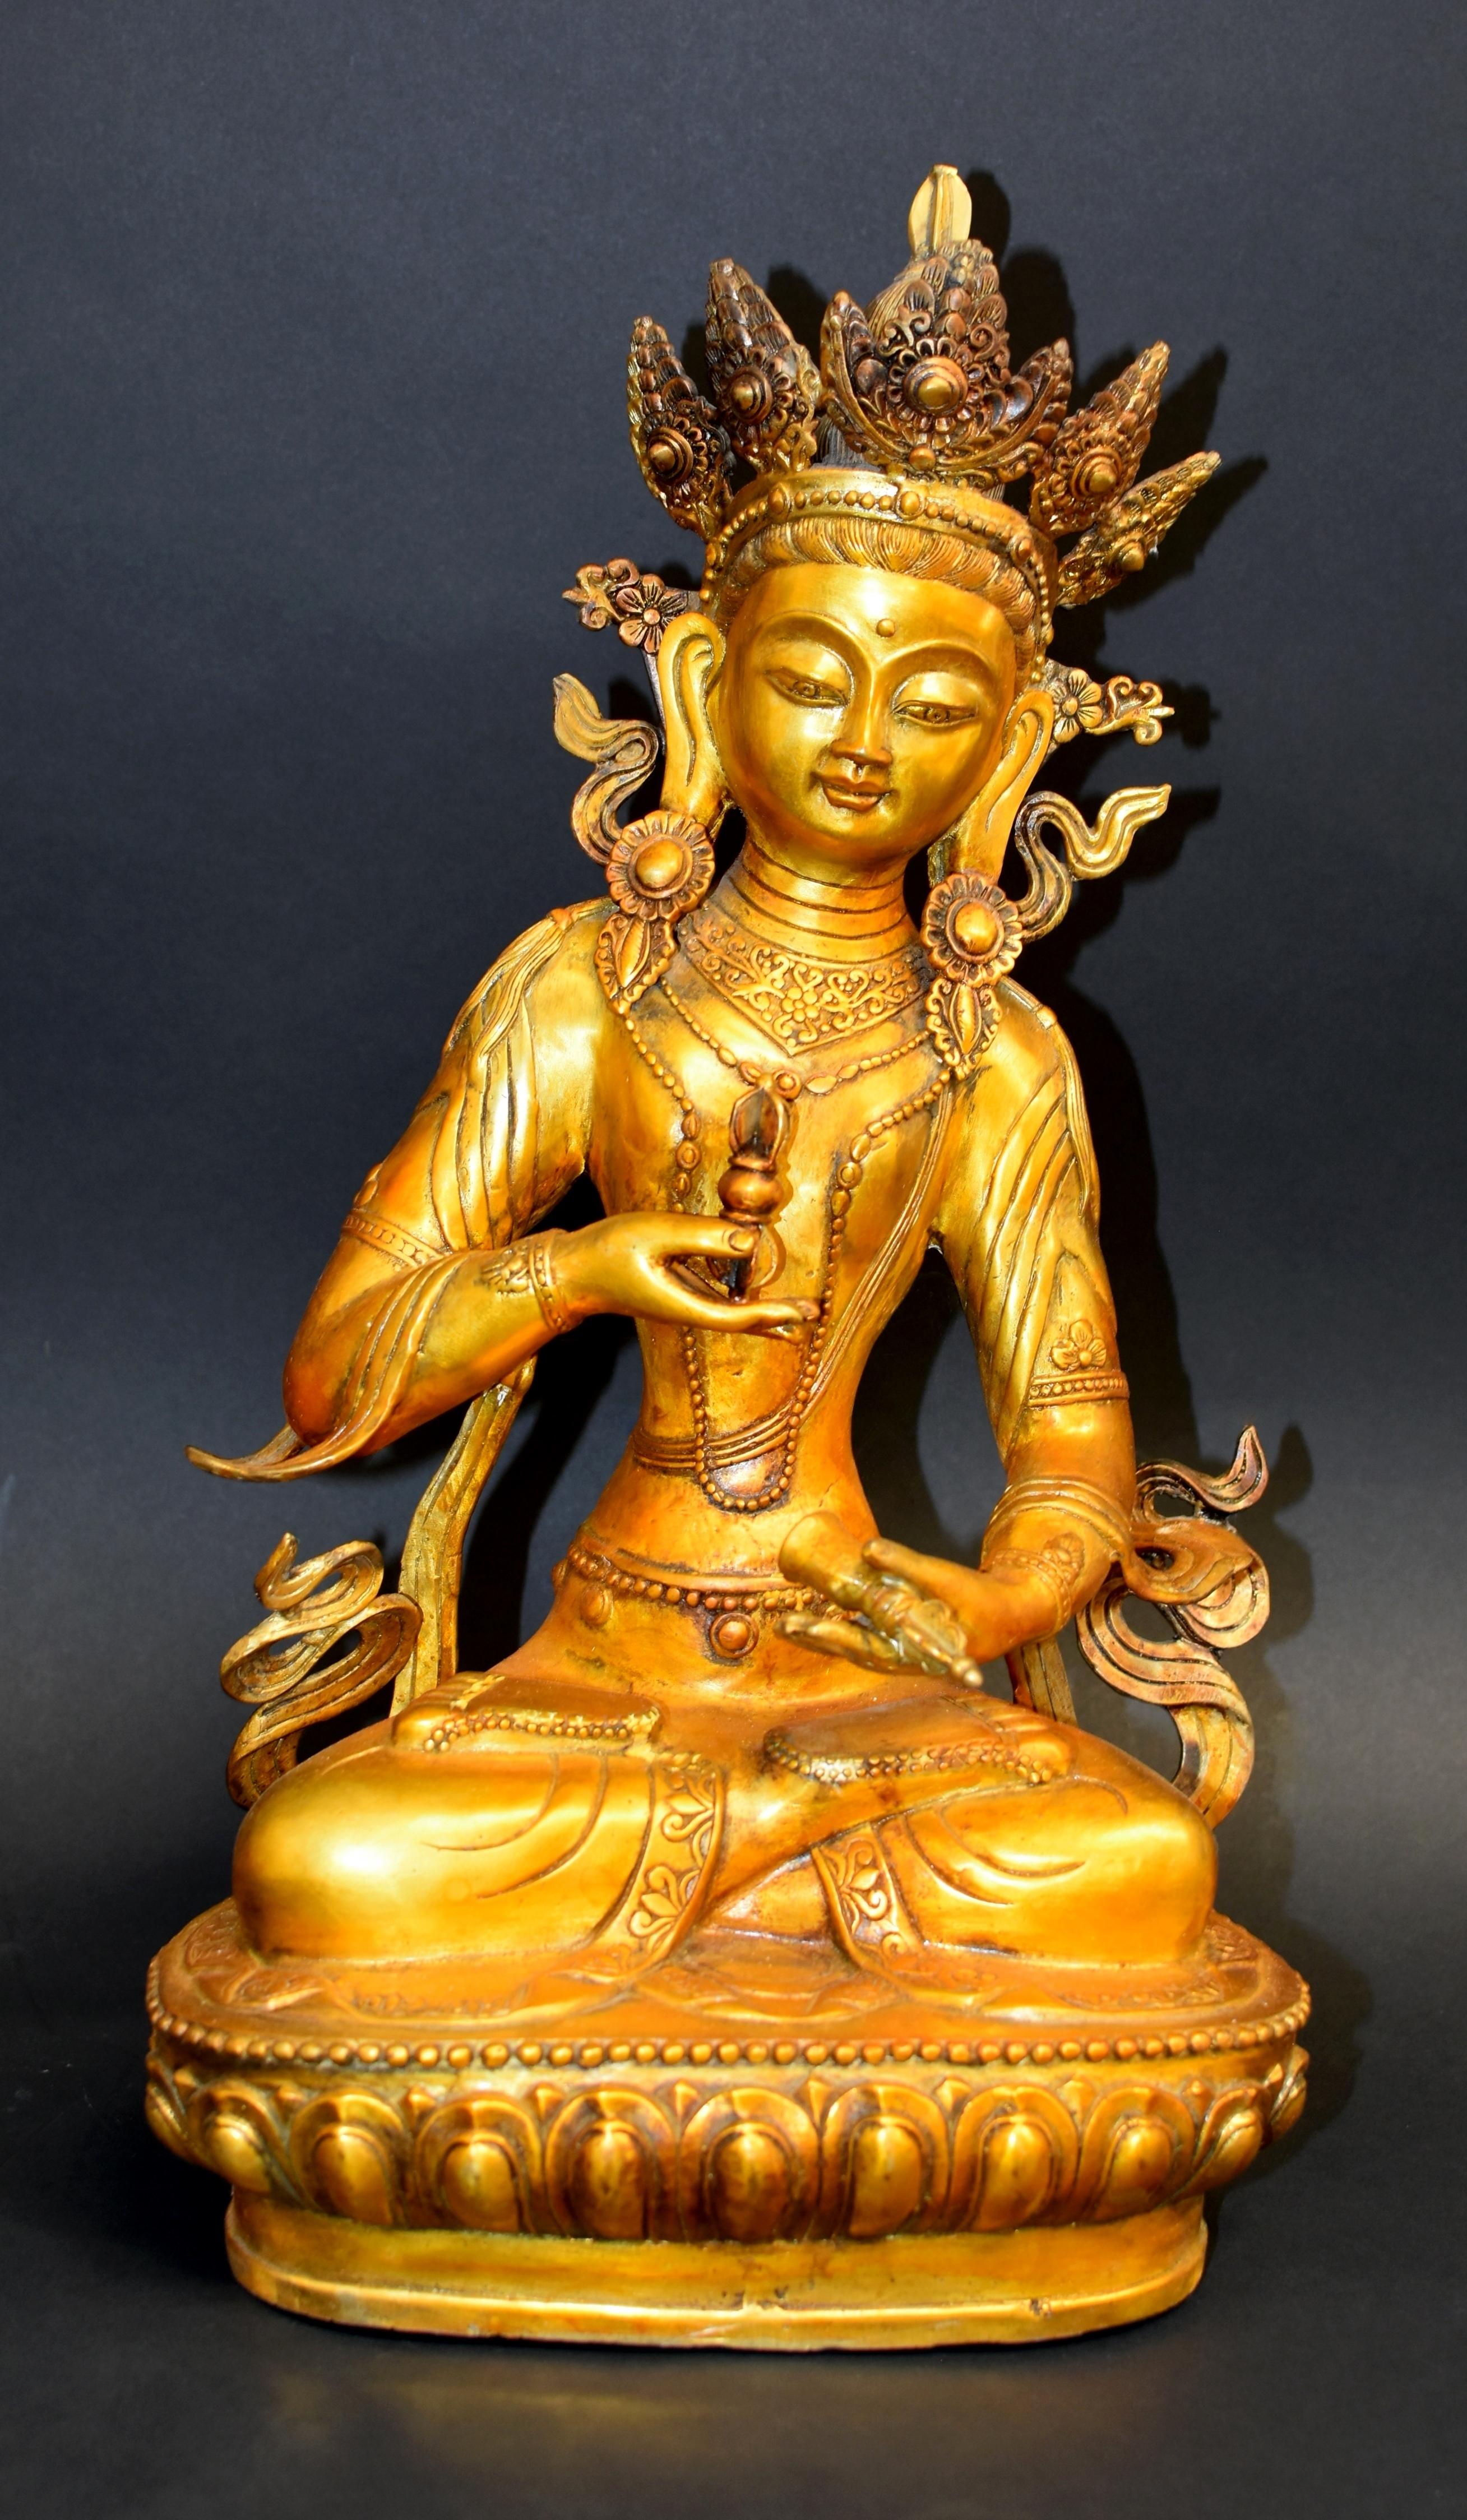 A large near 11 lb gilt bronze sculpture of Tibetan Vajrasattva. Seated padmasna on lotus throne, the Great Vajrasattva has large downcast eyes and pendulous earlobes, an urna on his forehead symbolizing the third eye to decipher and conquer evil,